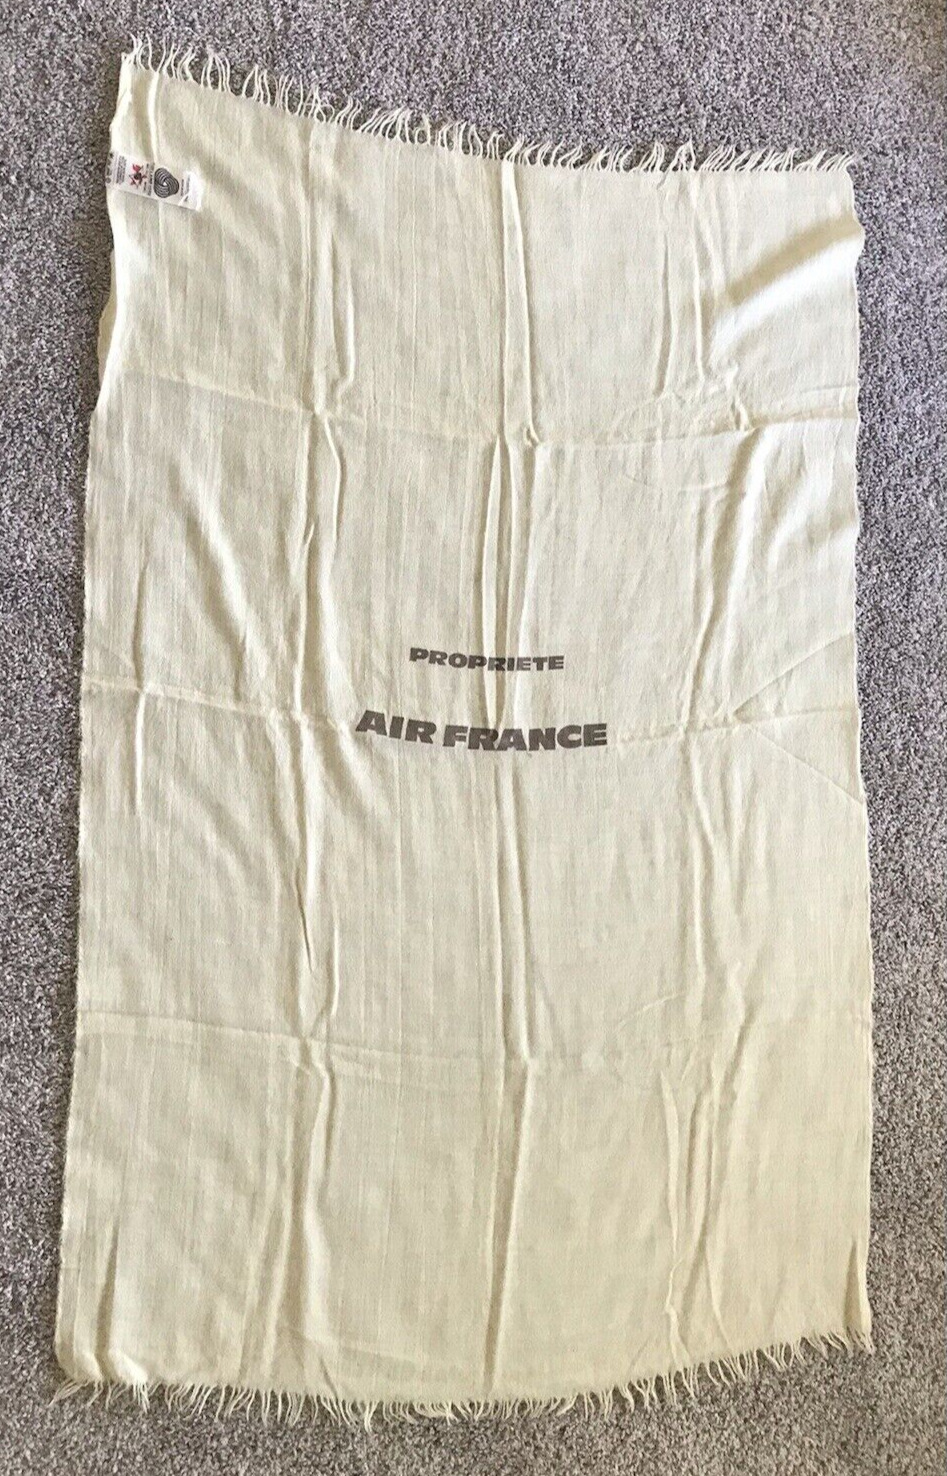 Vintage 1970s Air France Inflight Pure Wool Cabin Blanket Throw Cream 56\